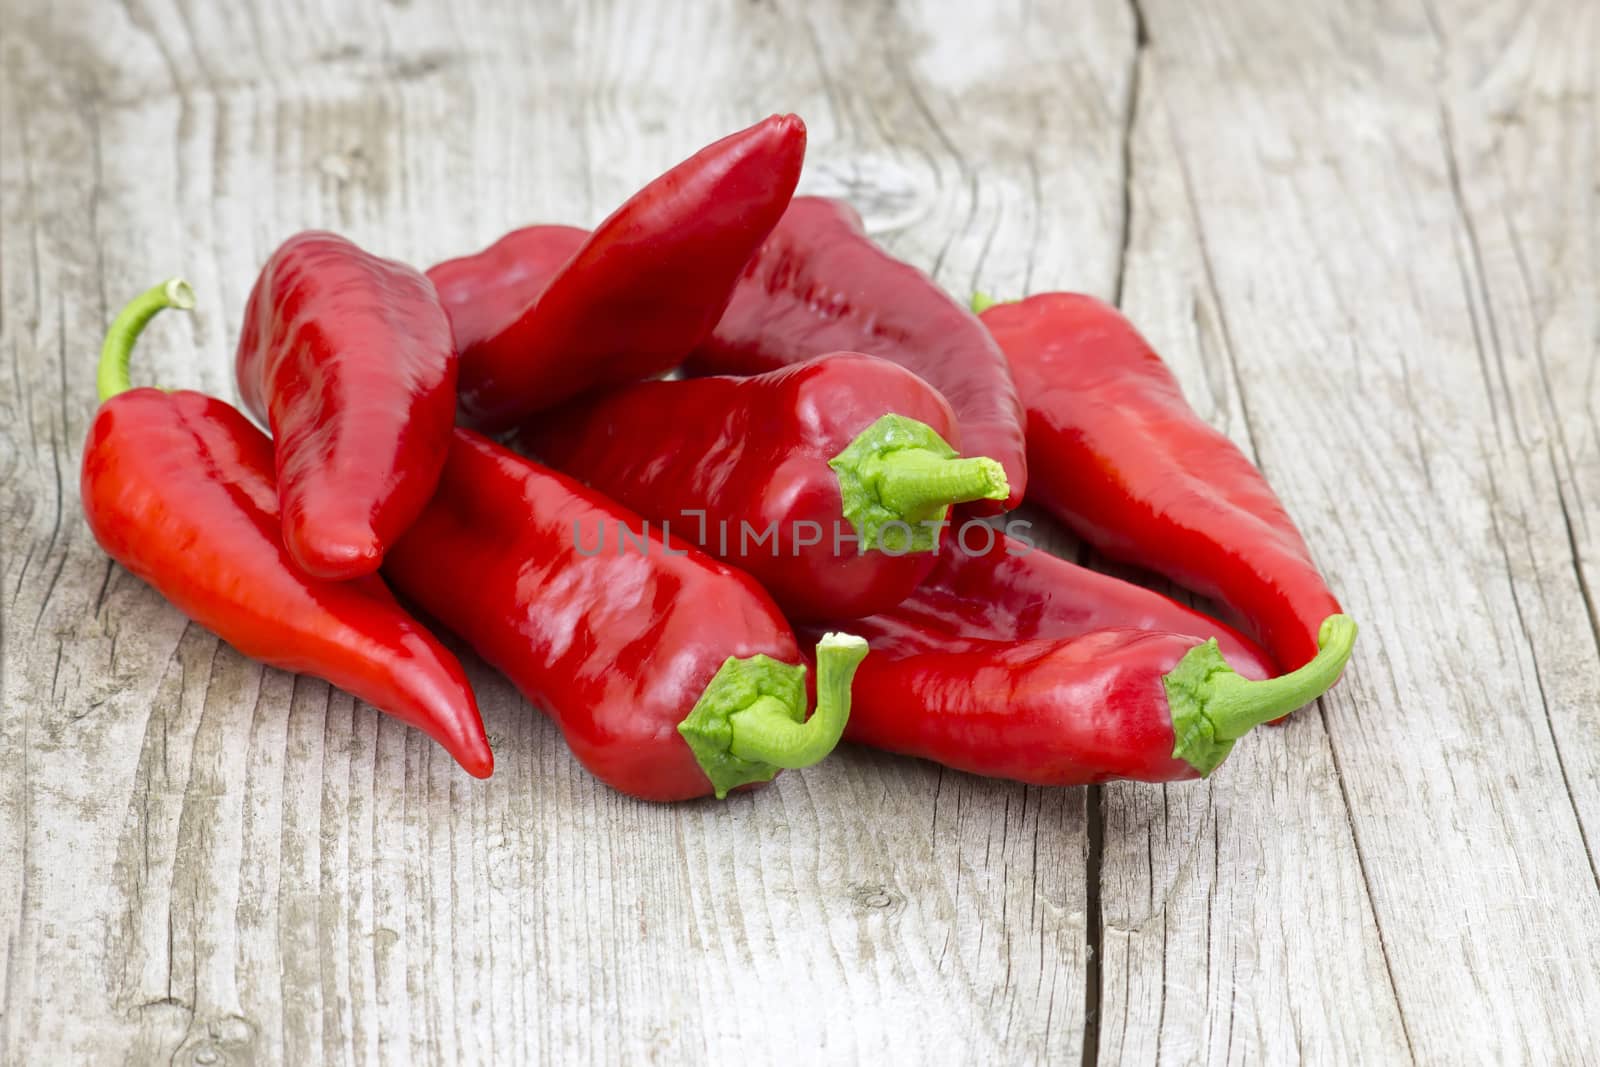 red peppers on wooden background by miradrozdowski